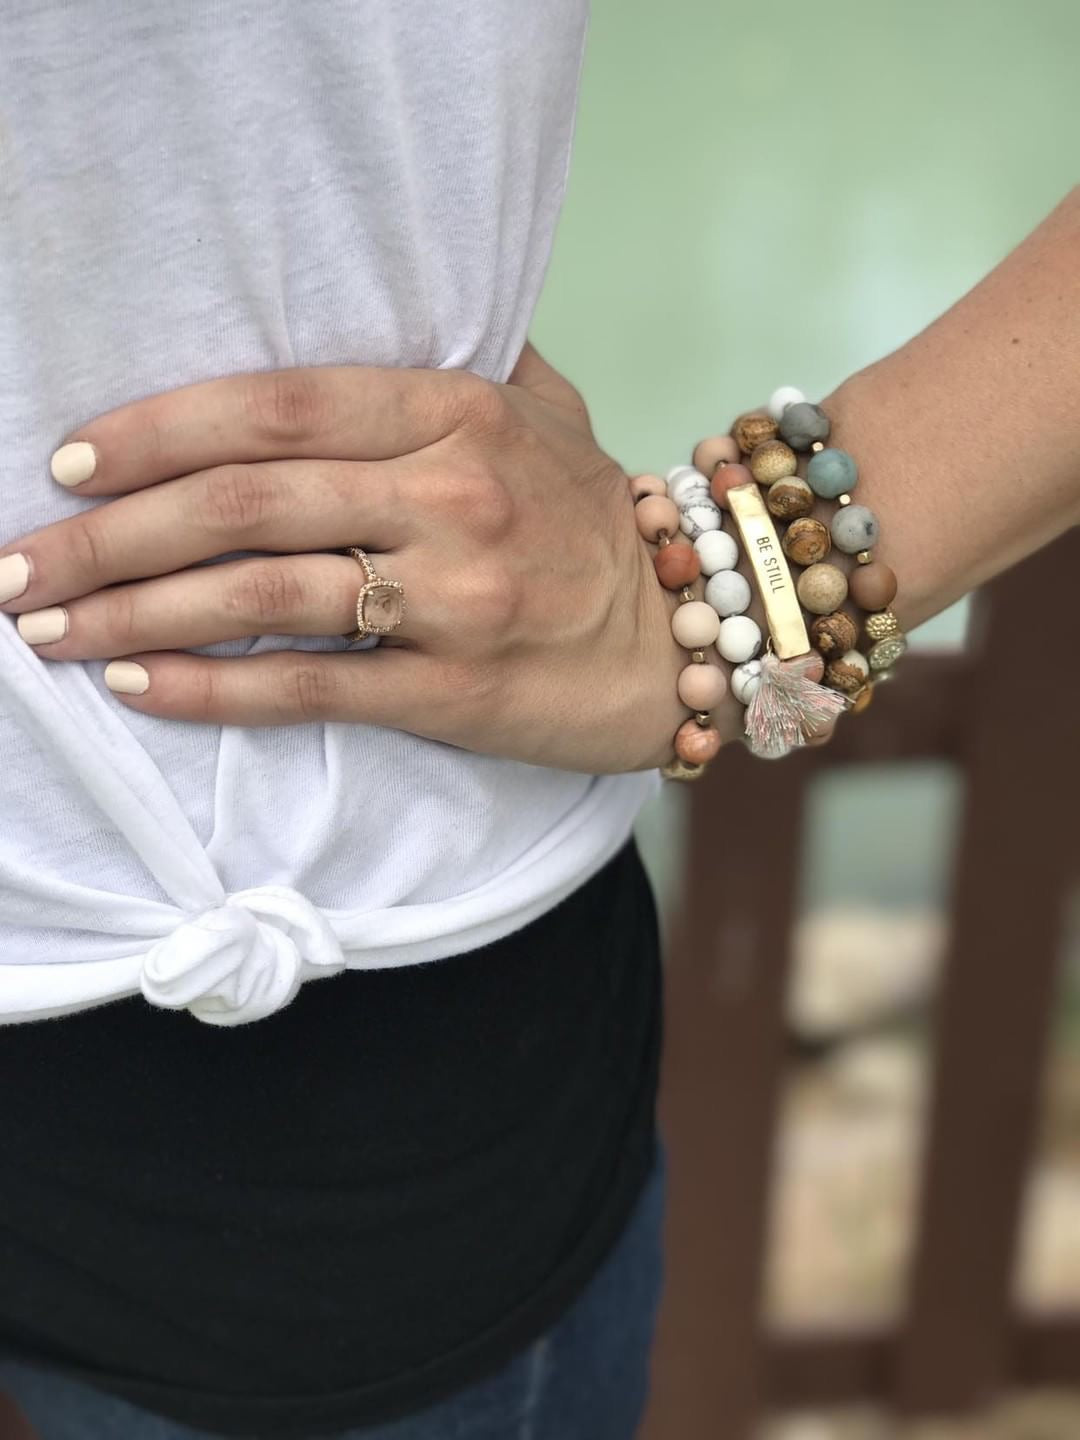 Live Inspired with our gemstone, fabric, and crystal creations.  All For Zen enhances your wellness focused and active lifestyle through functional jewelry and crystals. Our jewelry is one of a kind and created in combination with up-cycled fabric.